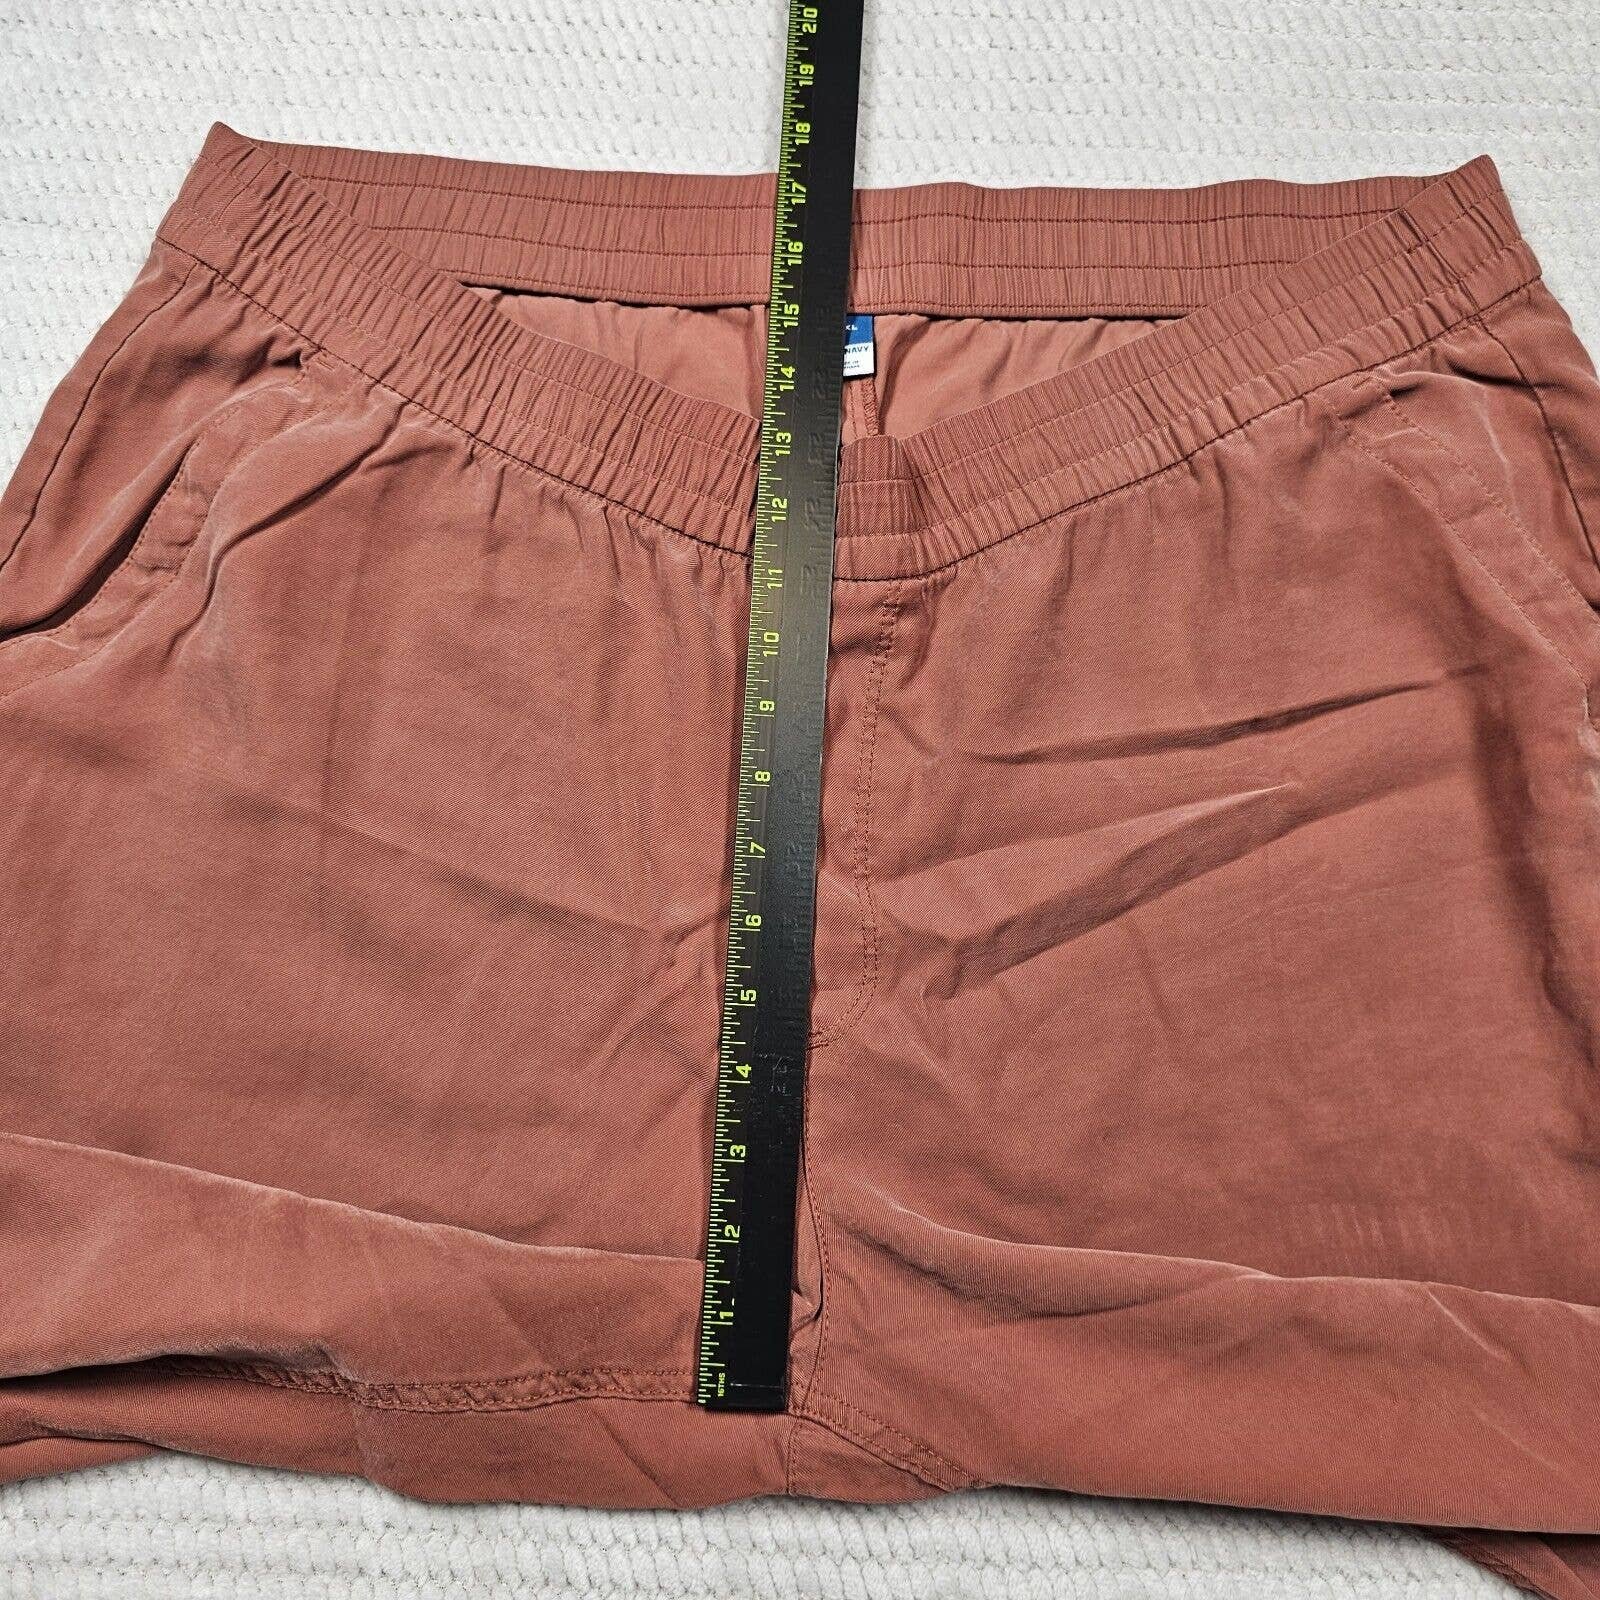 Exclusive Old Navy Jogger Pants Womens 2x Rust Color Light Weight Elastic Waist LC7ROgsyo hot sale